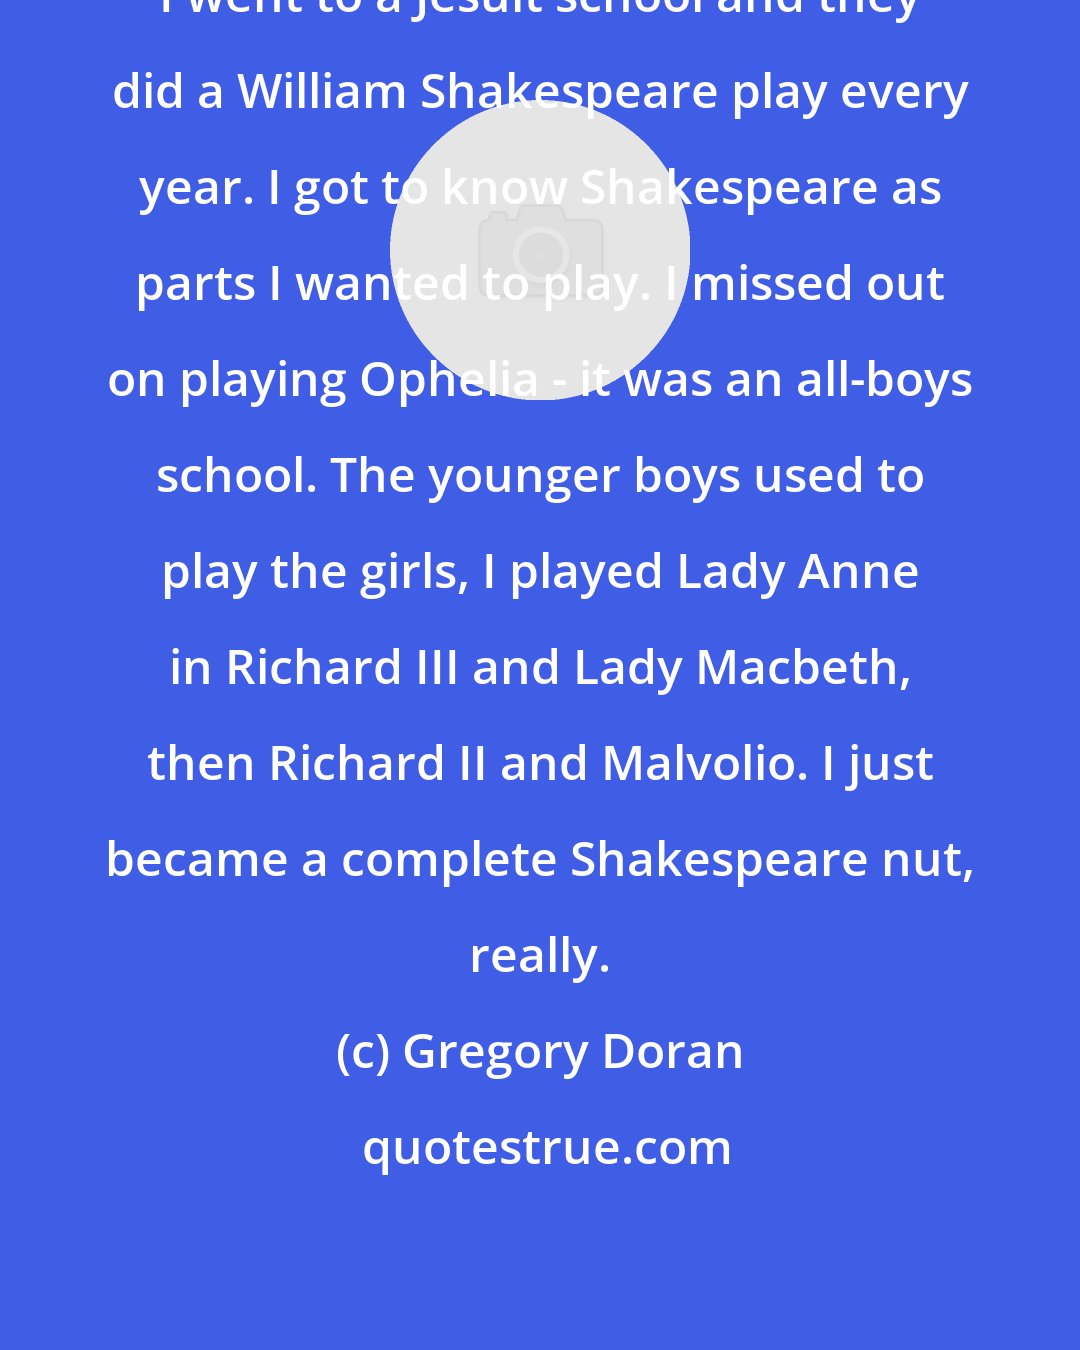 Gregory Doran: I went to a Jesuit school and they did a William Shakespeare play every year. I got to know Shakespeare as parts I wanted to play. I missed out on playing Ophelia - it was an all-boys school. The younger boys used to play the girls, I played Lady Anne in Richard III and Lady Macbeth, then Richard II and Malvolio. I just became a complete Shakespeare nut, really.